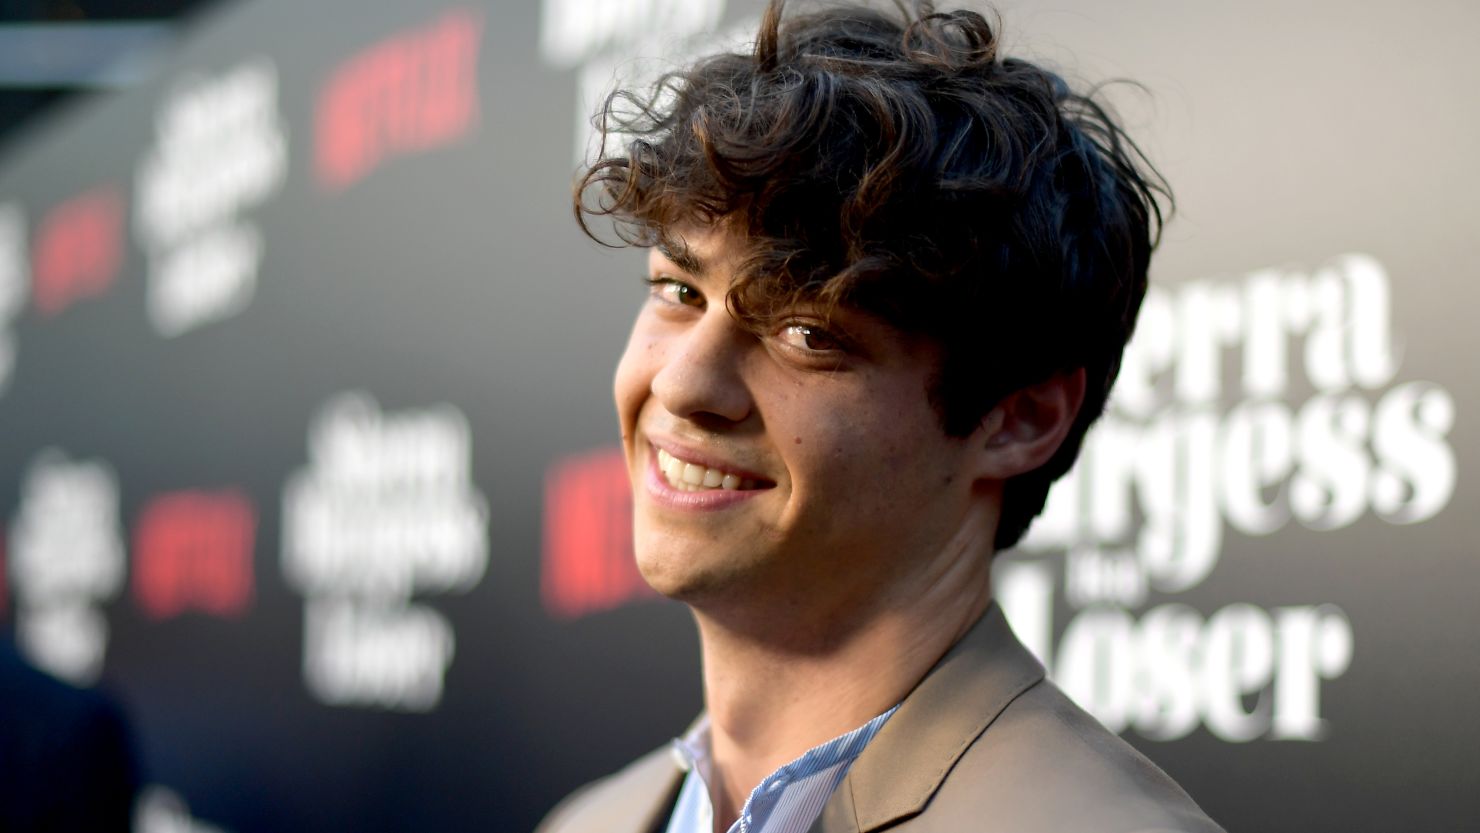 Noah Centineo is starring in the "Masters of the Universe" remake.